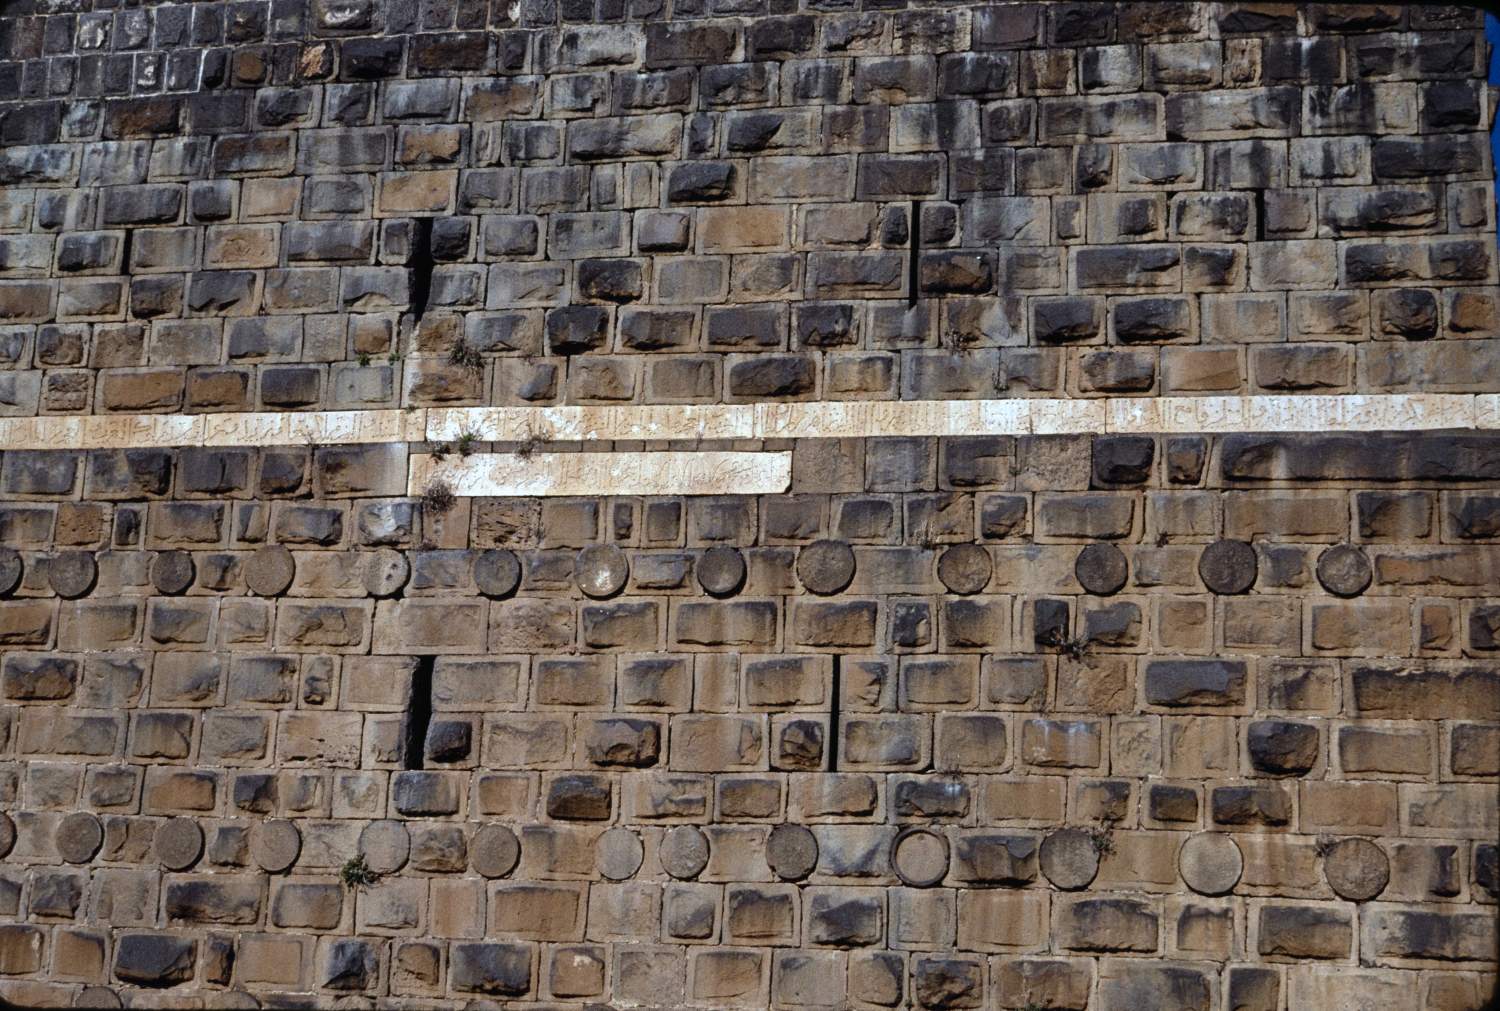 View of inscription band on walls.